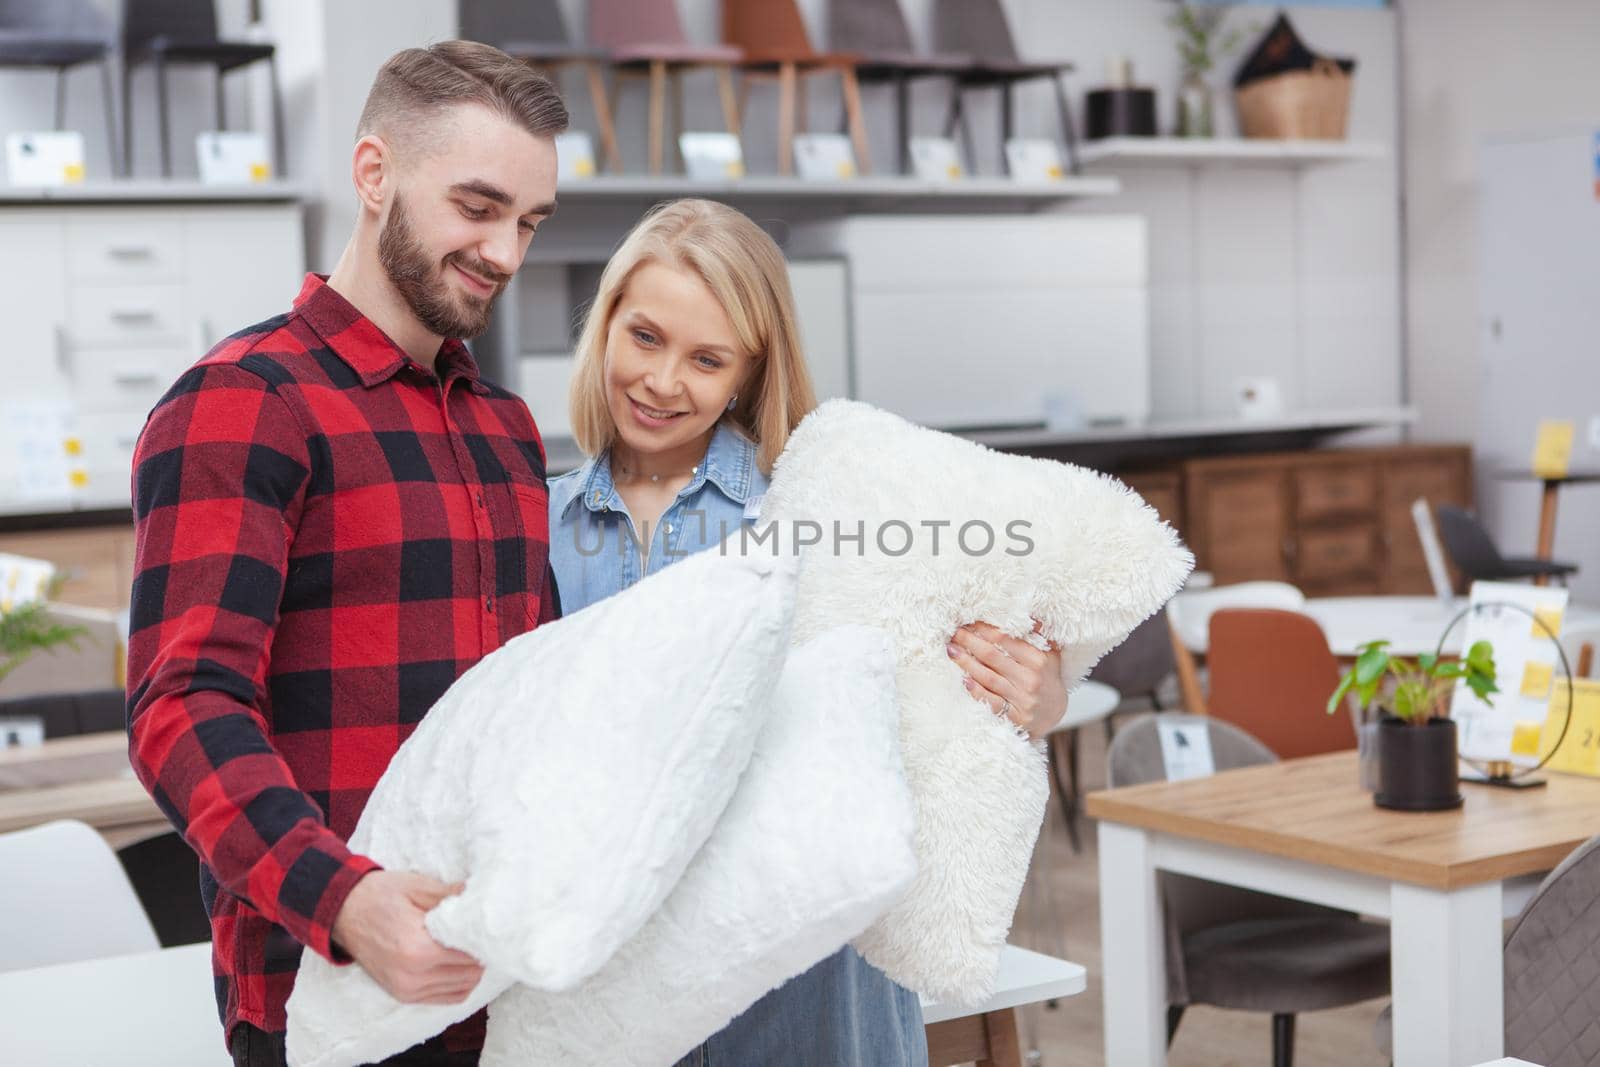 Lovely young couple shopping for beddings together at home goods store, copy space. Beautiful woman and her handsome boyfriend examining pillows on sale